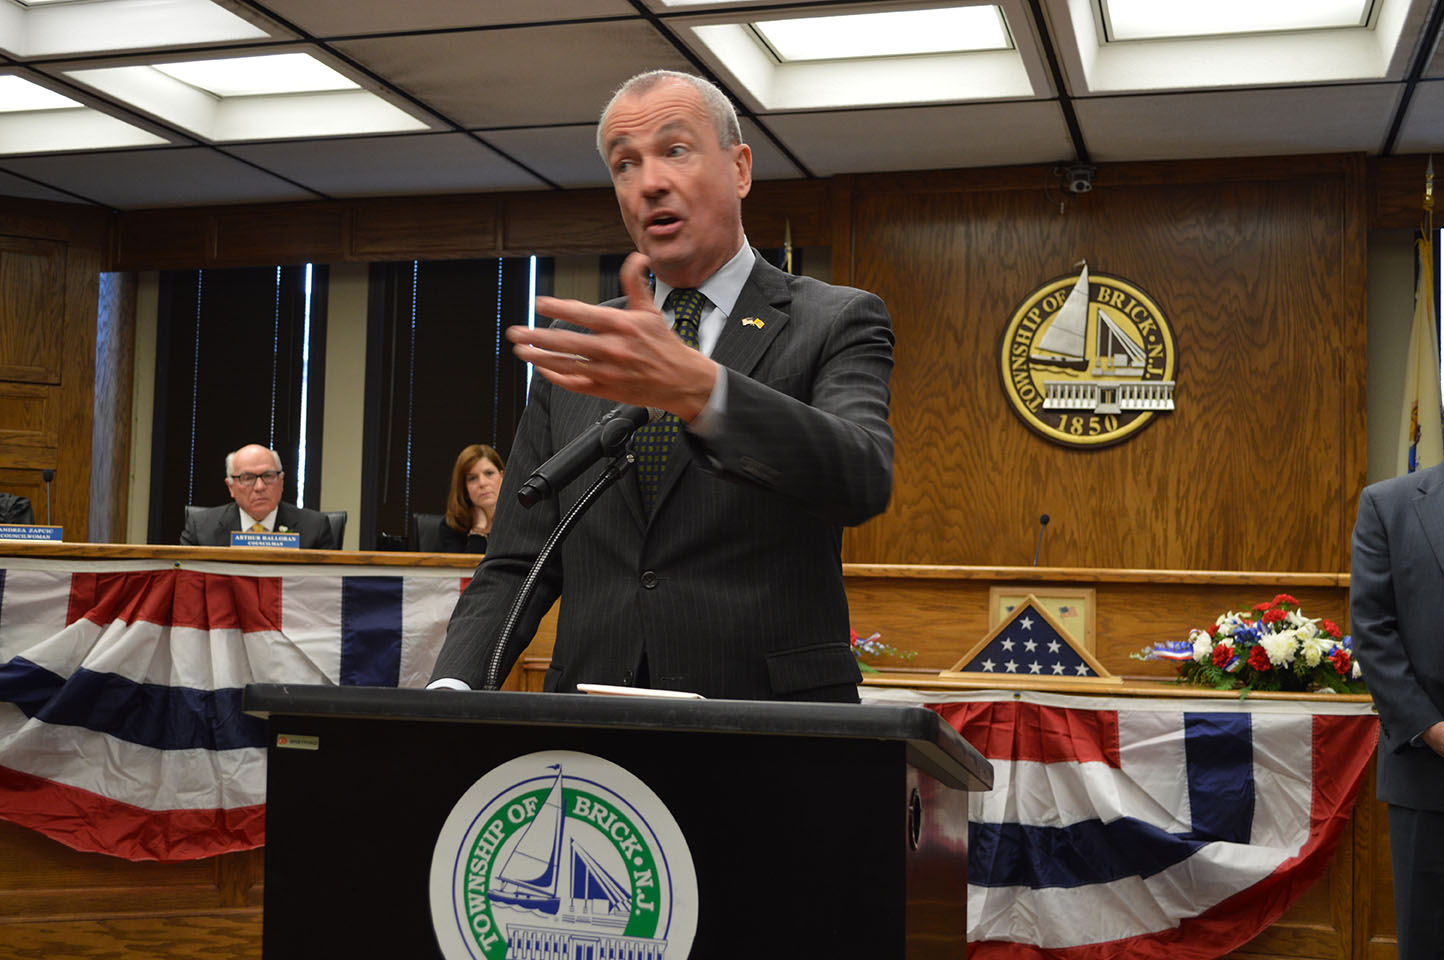 N.J. Governor Phil Murphy delivers remarks in Brick Township. (Photo: Daniel Nee)